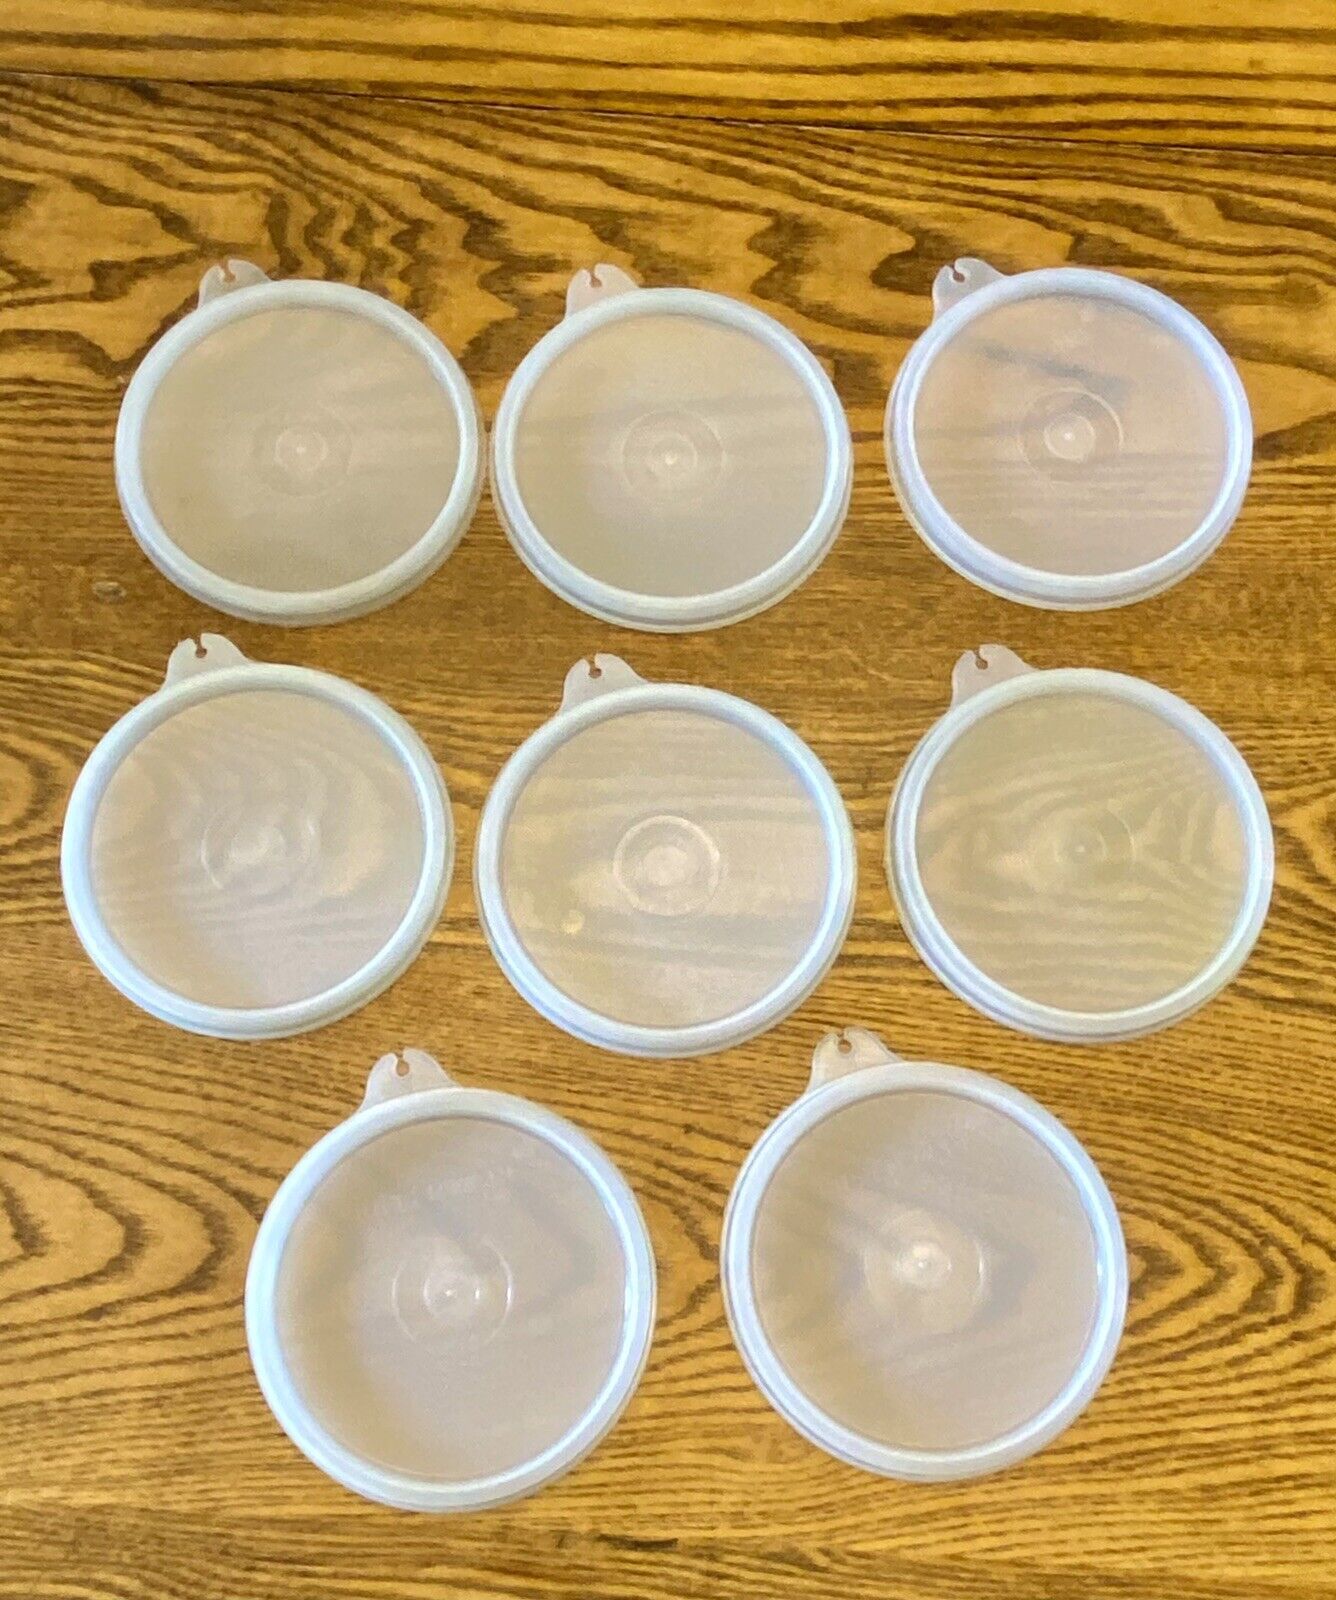 Lot of 8 - Vintage TUPPERWARE #733 Replacement Seal Lids